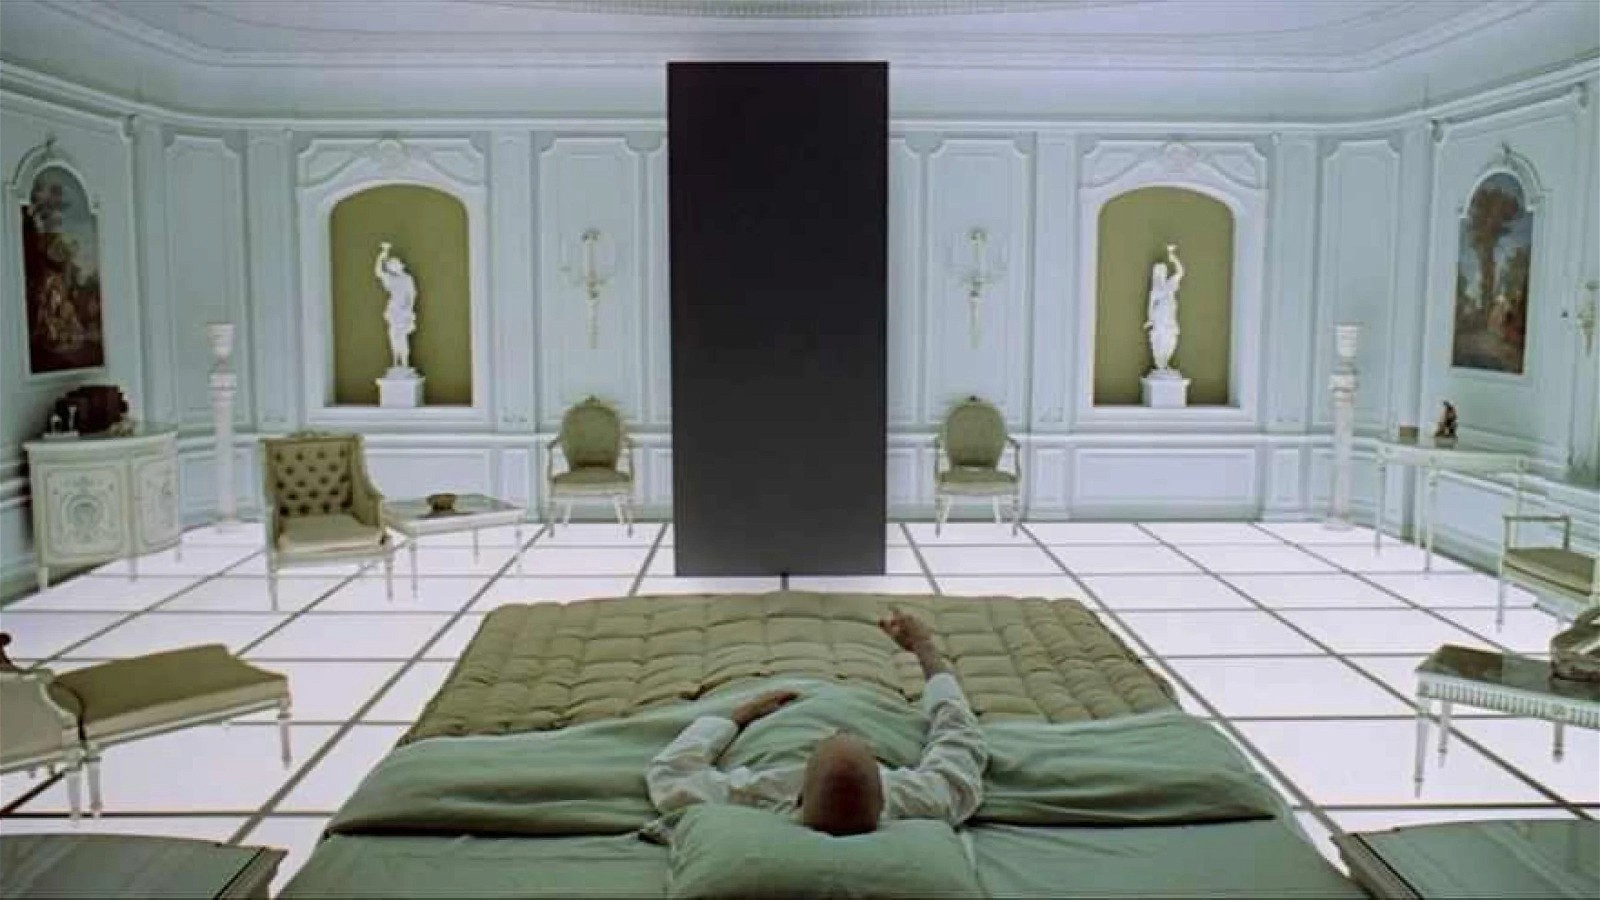 2001: A Space Odyssey – ending scene